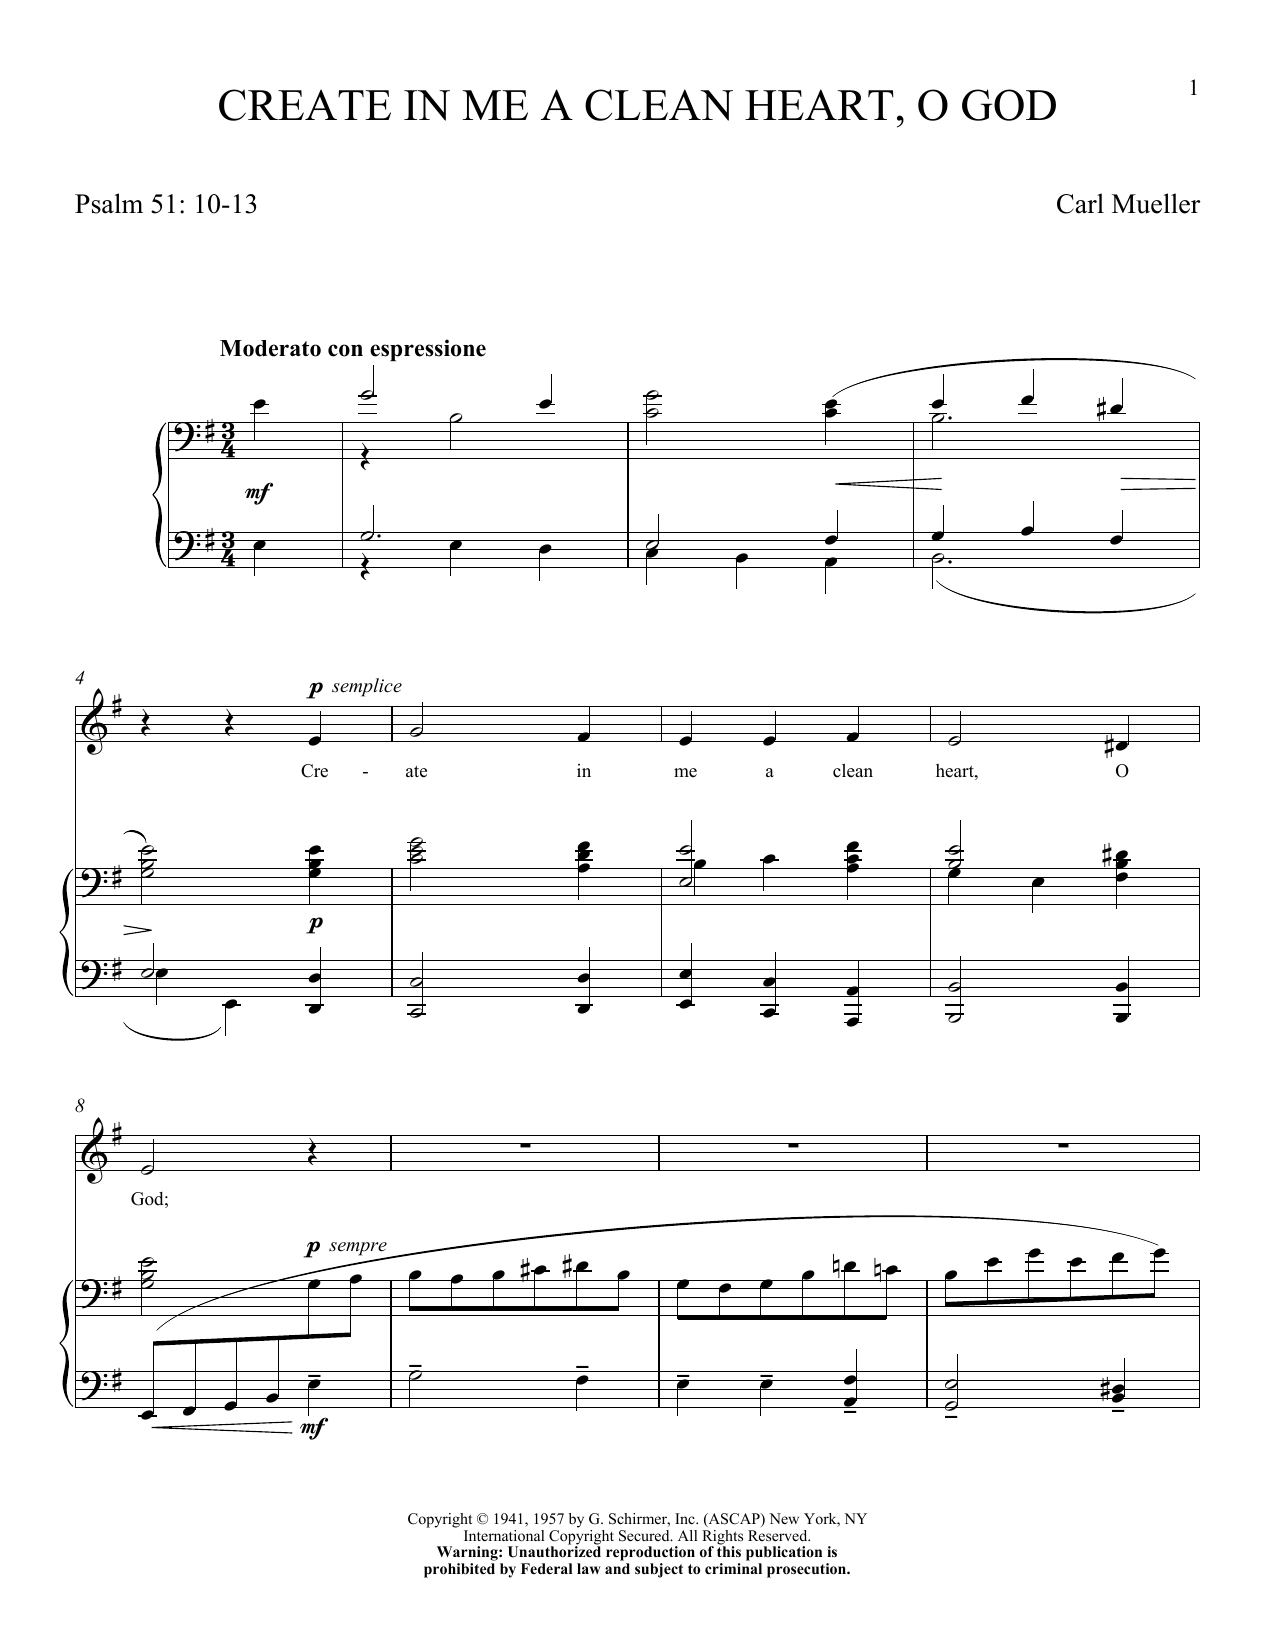 Download Keith Green Create In Me A Clean Heart, O God Sheet Music